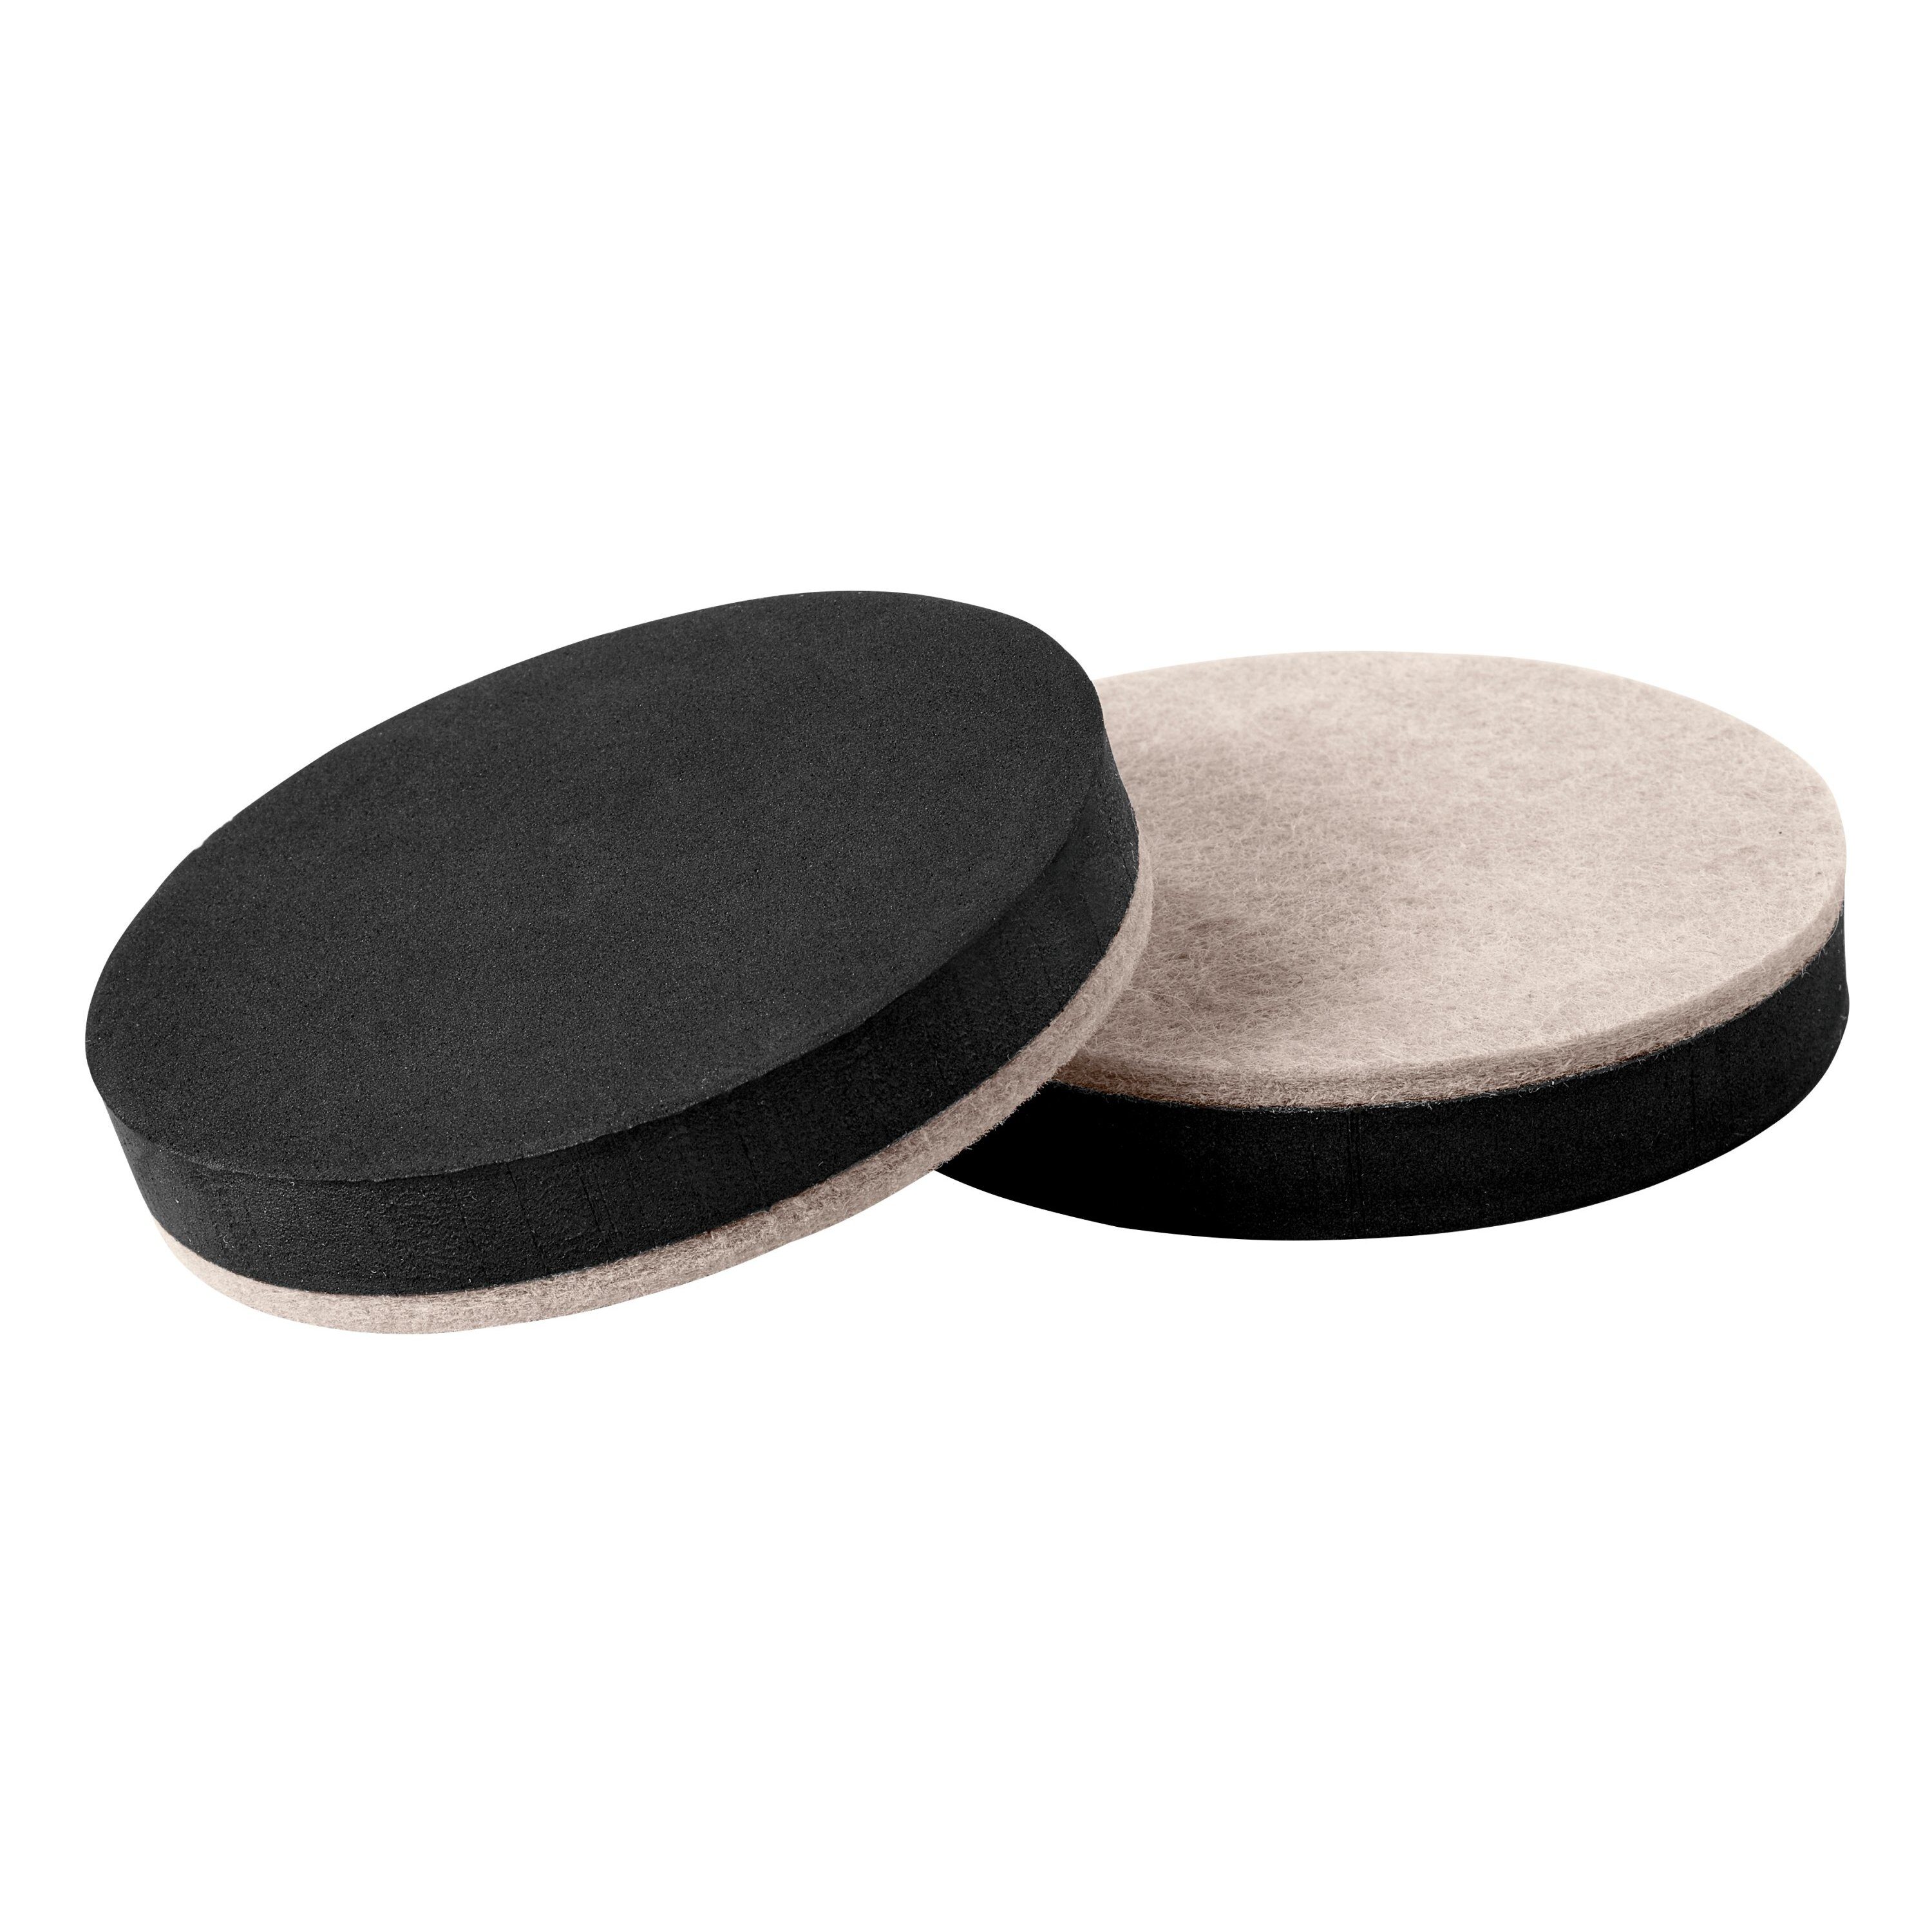  3.5 Felt Furniture Movers Sliders for Hardwood & Vinyl Floors,  16 PCS Round Reusable Felt Furniture Moving Pads, Sliders for Moving Heavy  Sofa Table Couch Cabinet, Glides Easily and Quickly (Black) 